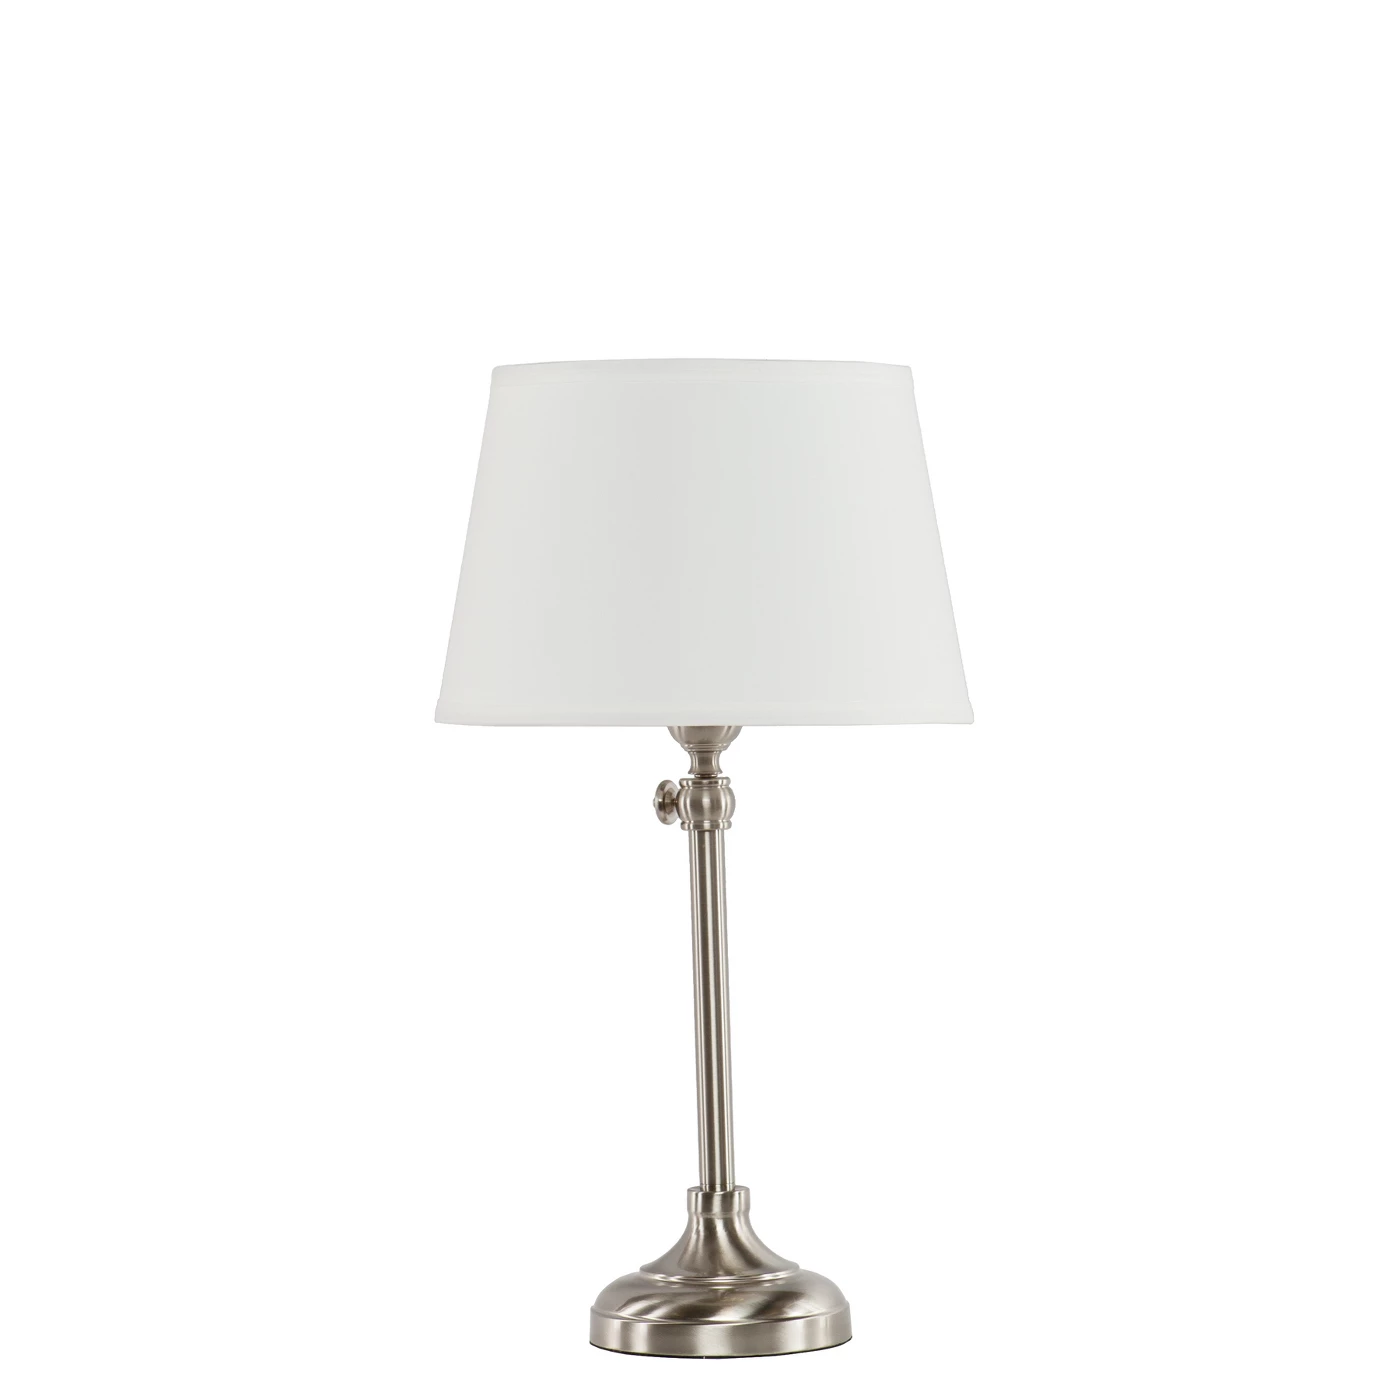 Danu Table Lamp Steel (Lamp Only) - Aiden Lane - image 2 of 6